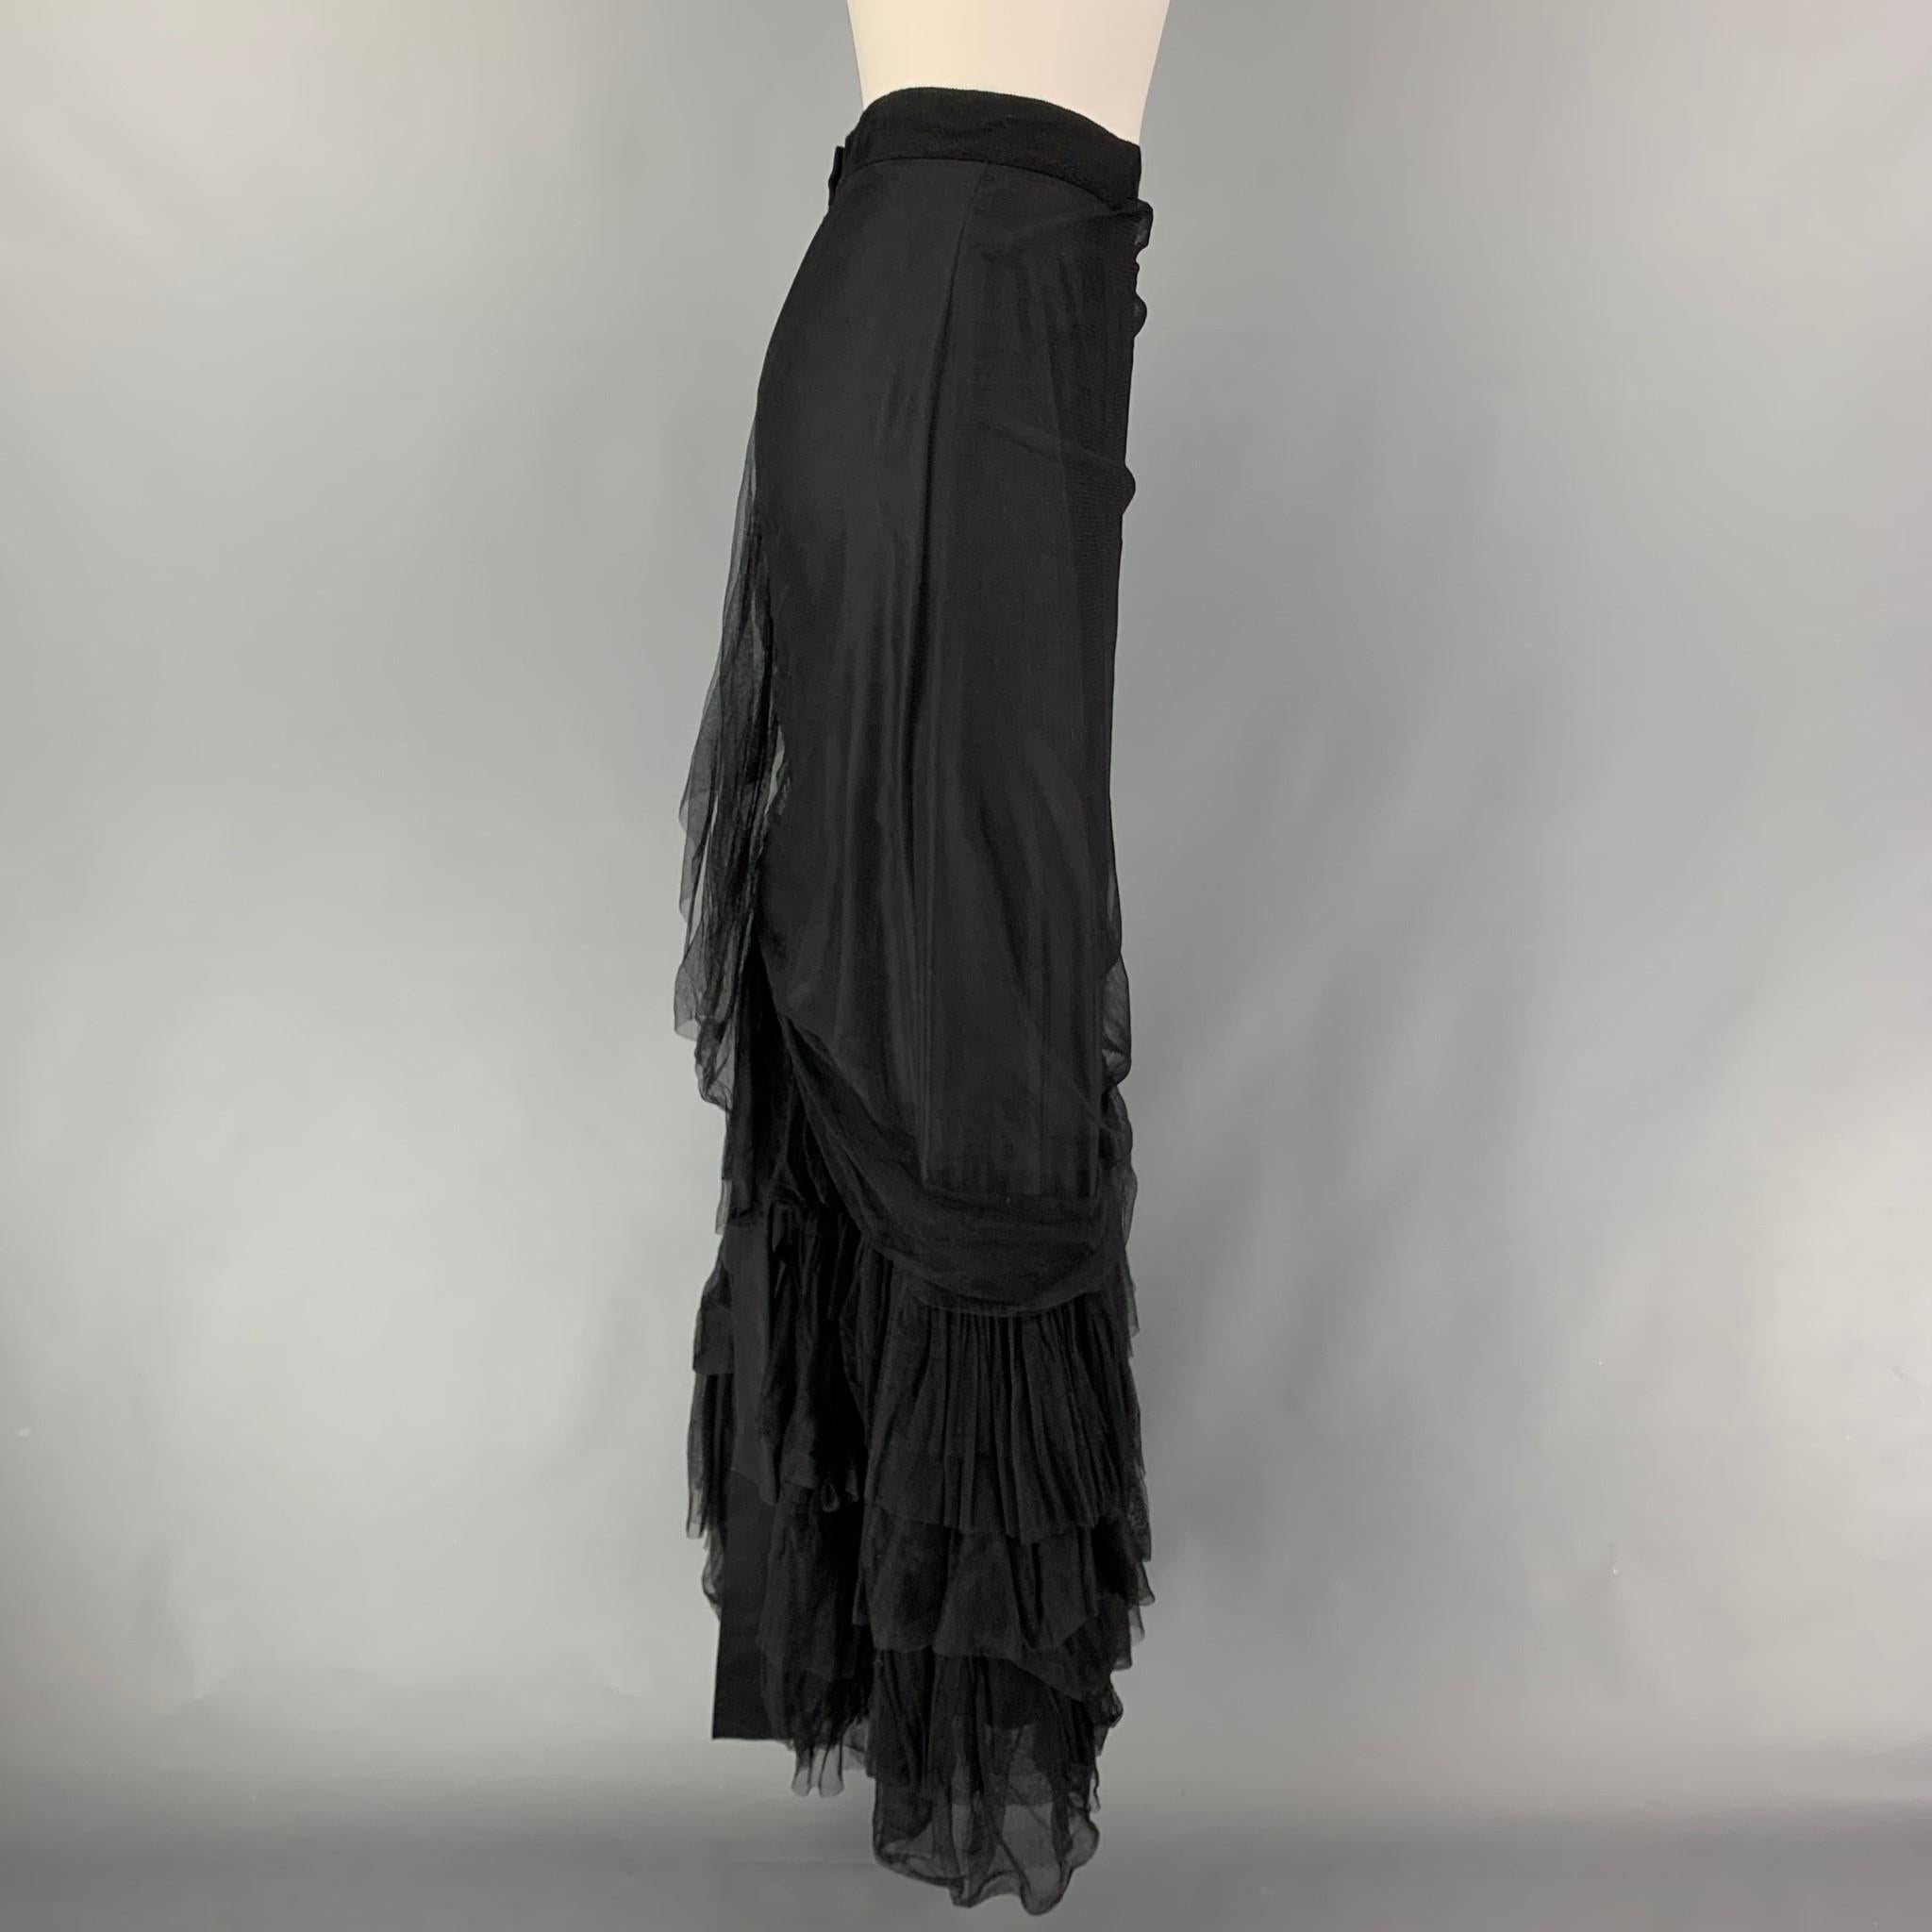 LANVIN 2009 skirt comes in a mesh black silk blend featuring a ruffled design, ribbon trim, and a back zip up closure. Made in France. 

Very Good Pre-Owned Condition.
Marked: 38

Measurements:

Waist: 28 in.
Hip: 32 in.
Length: 42 in.